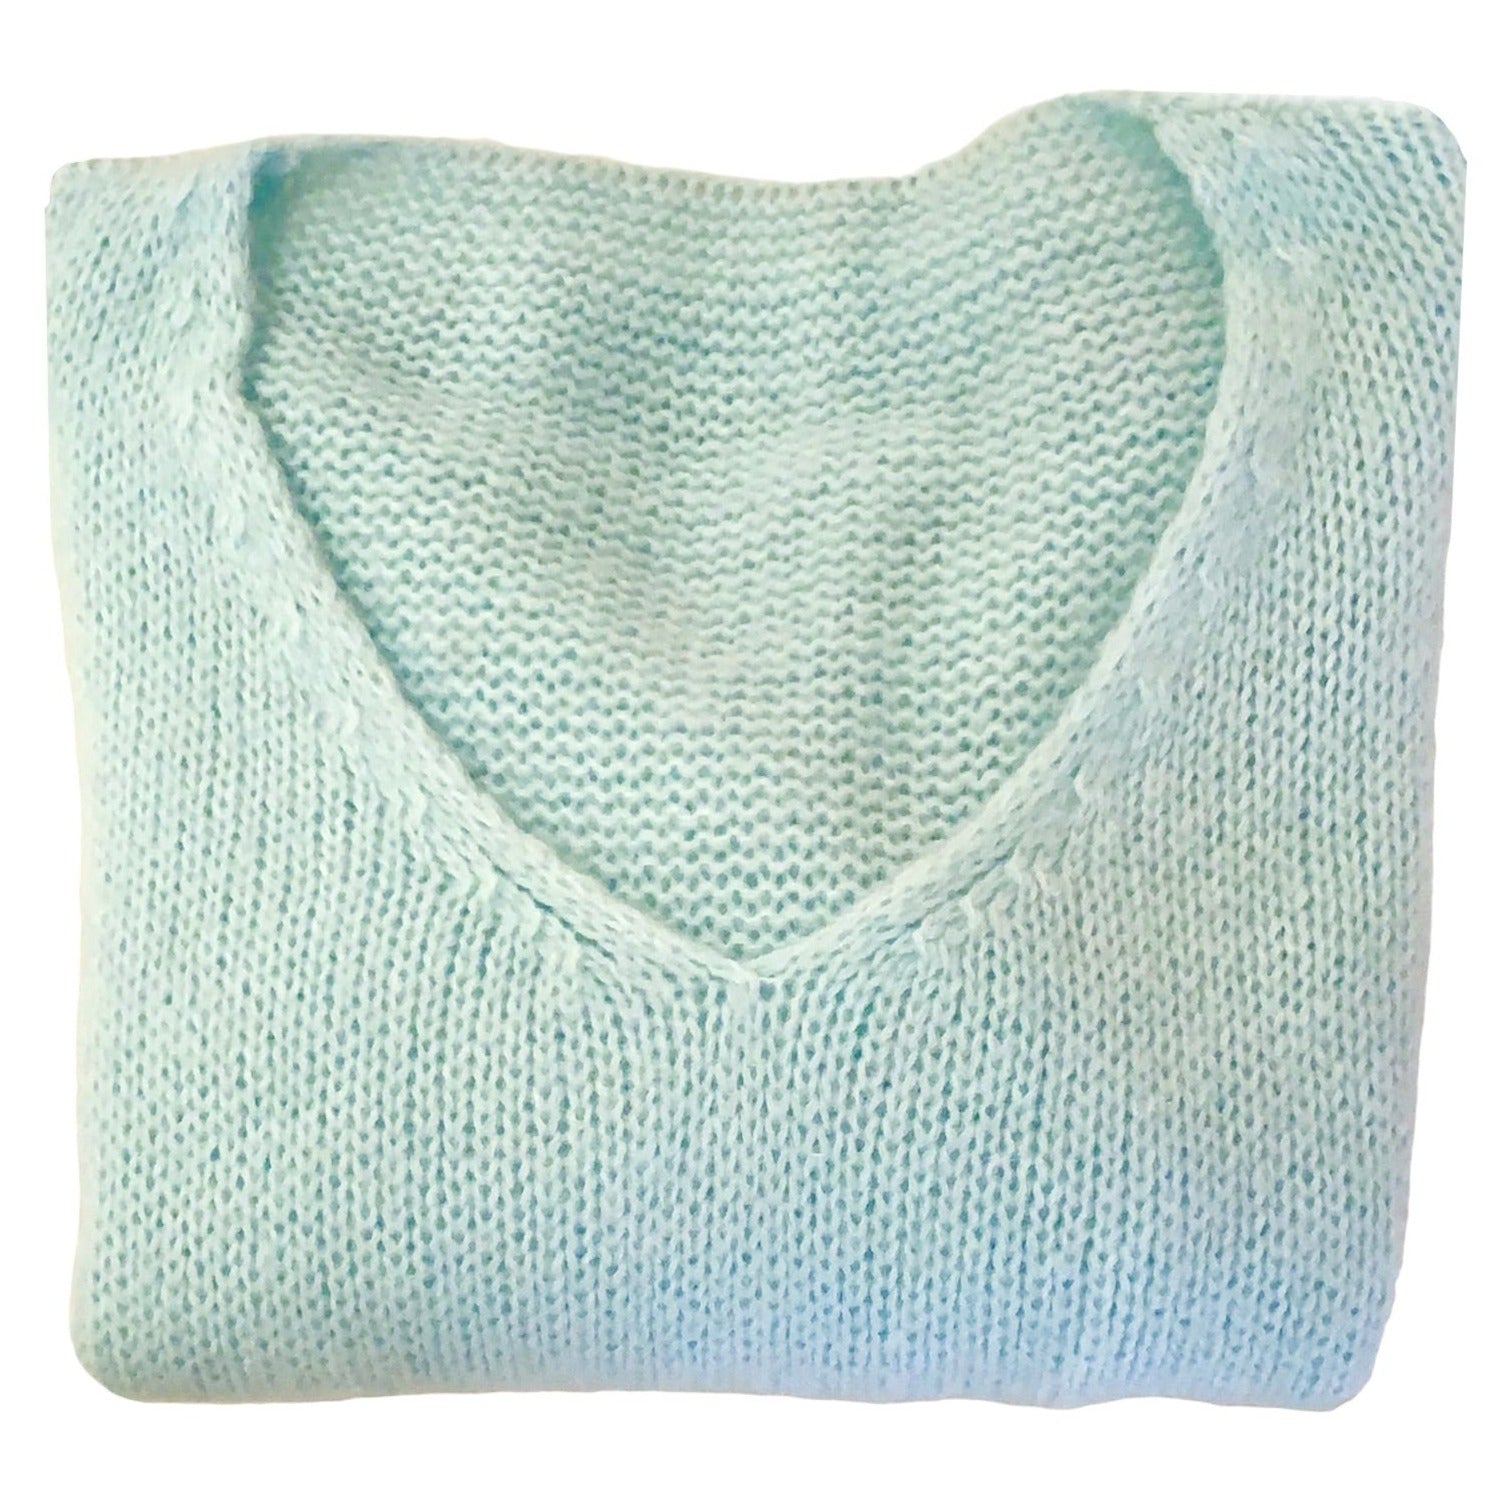 "Made in Italy" Mohair V-Neck Sweater - Pale Aqua